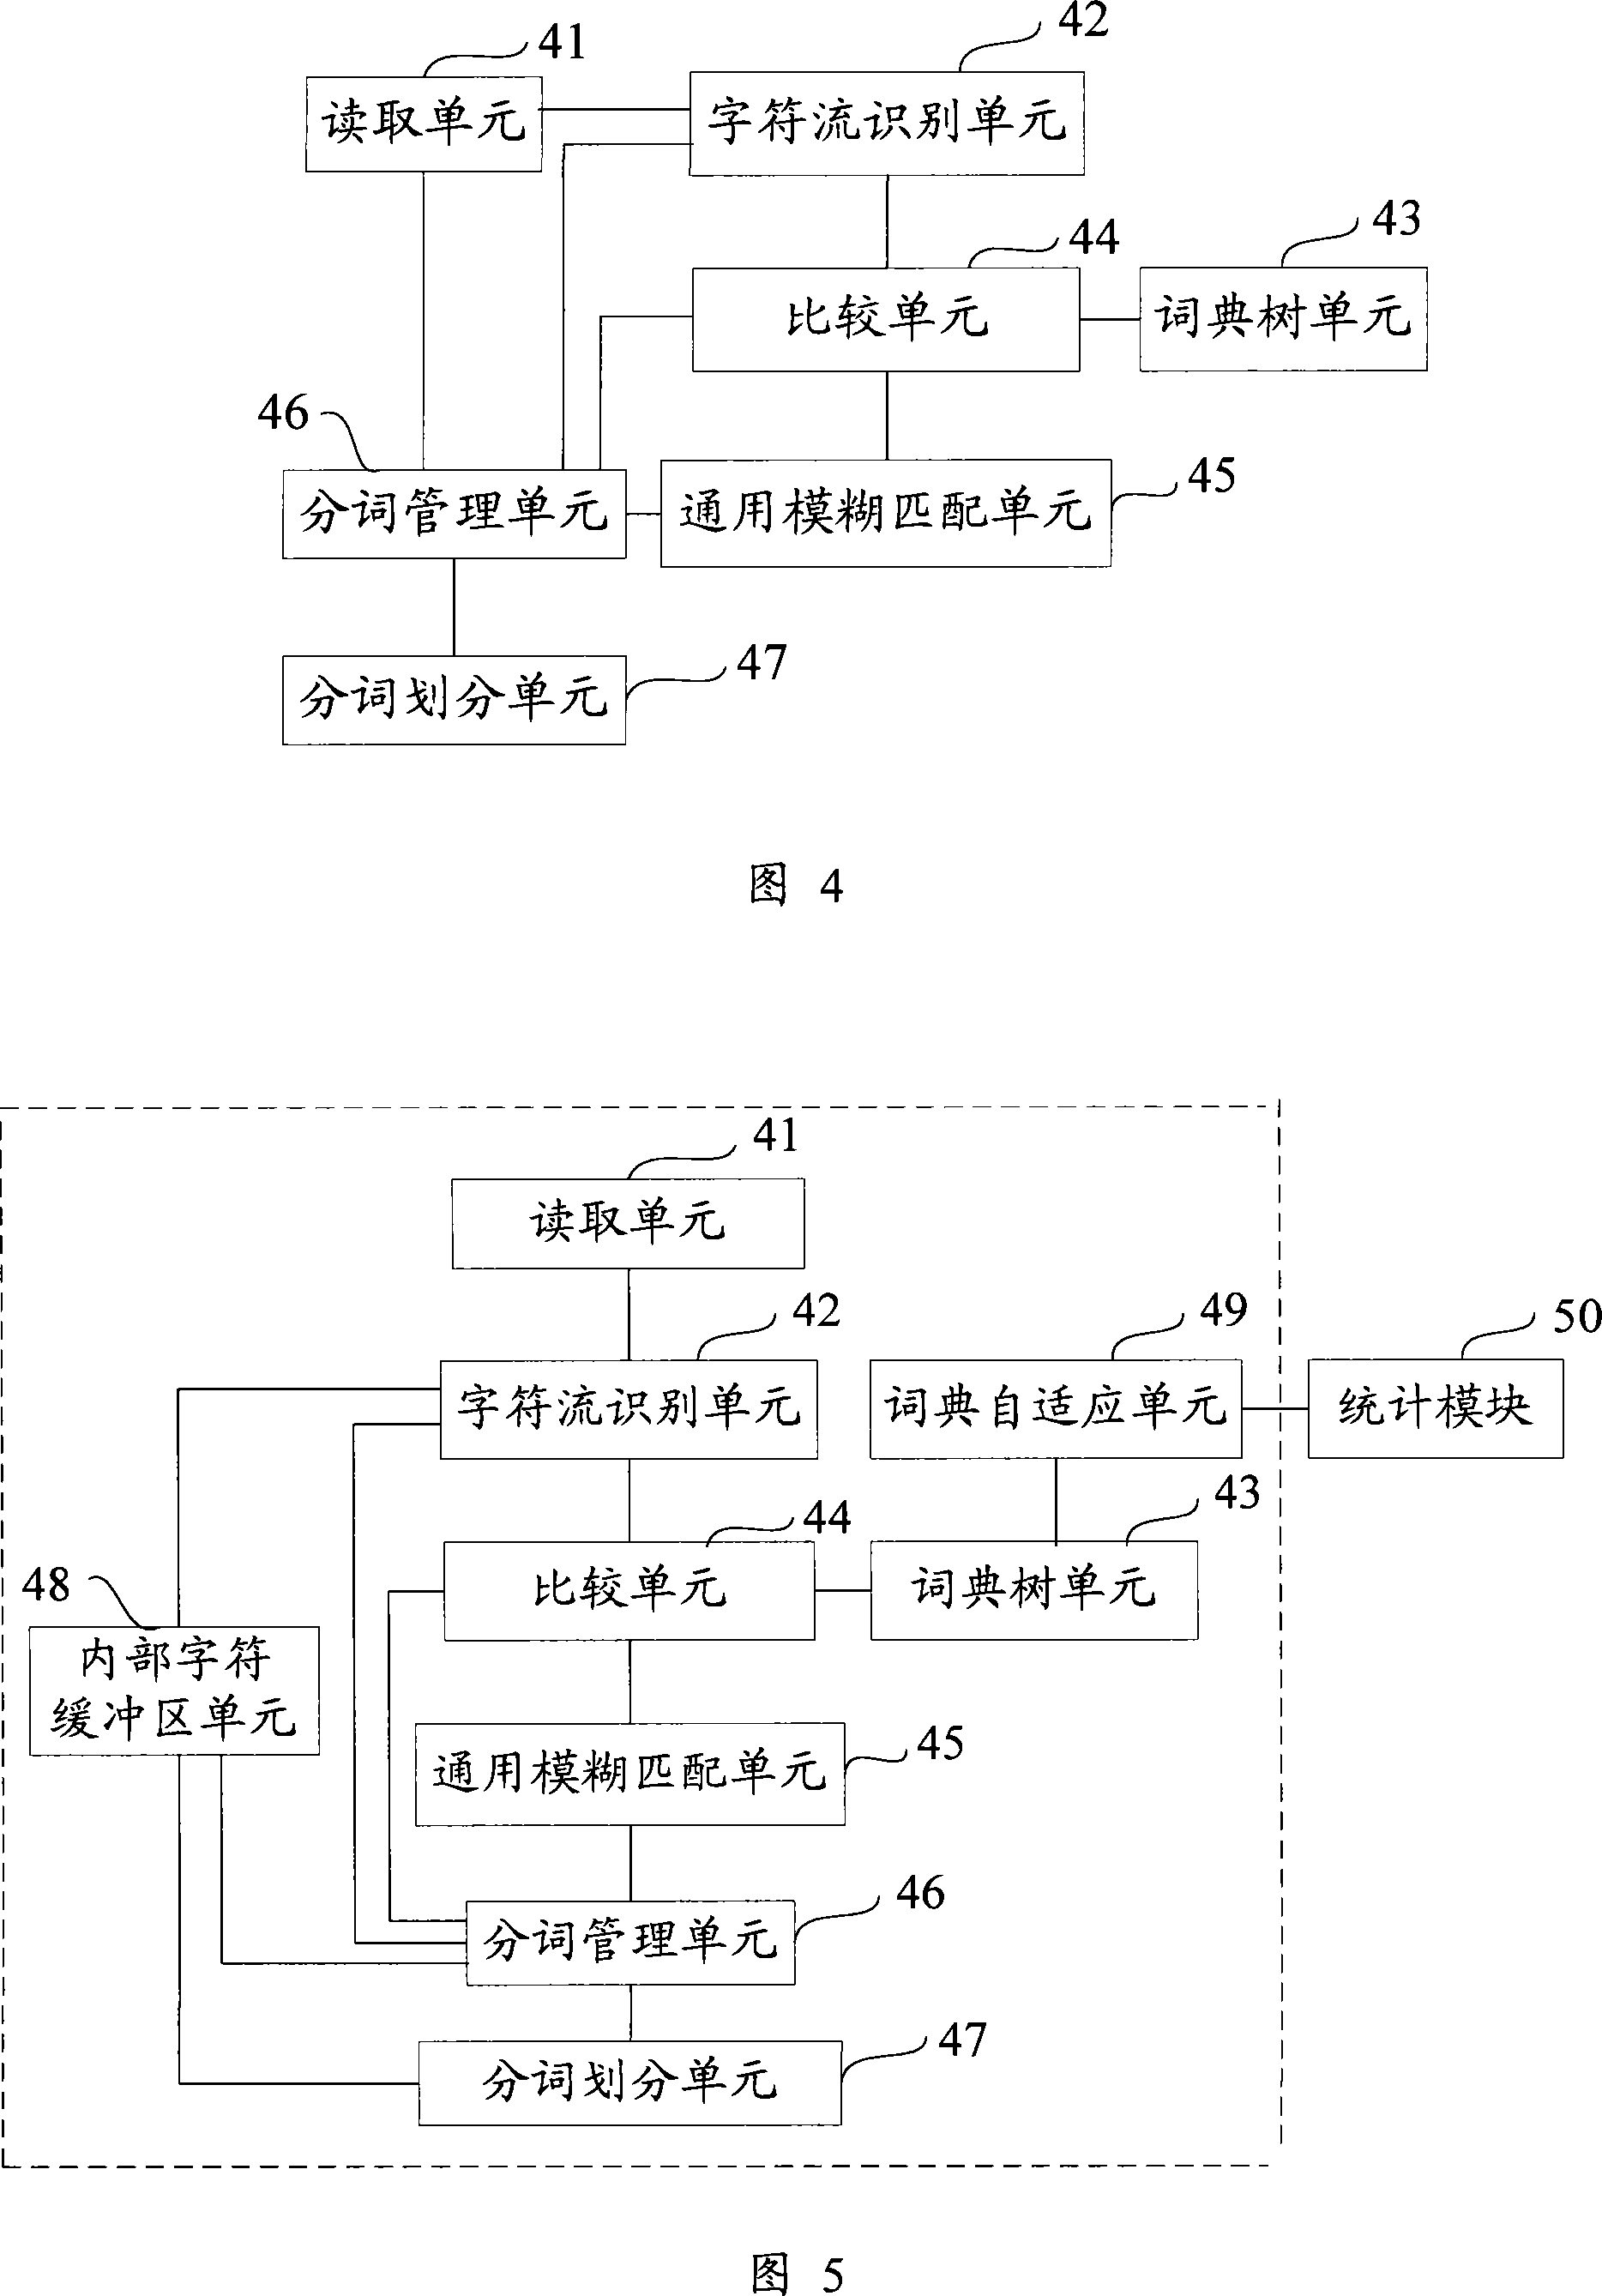 Method and system for cutting index participle